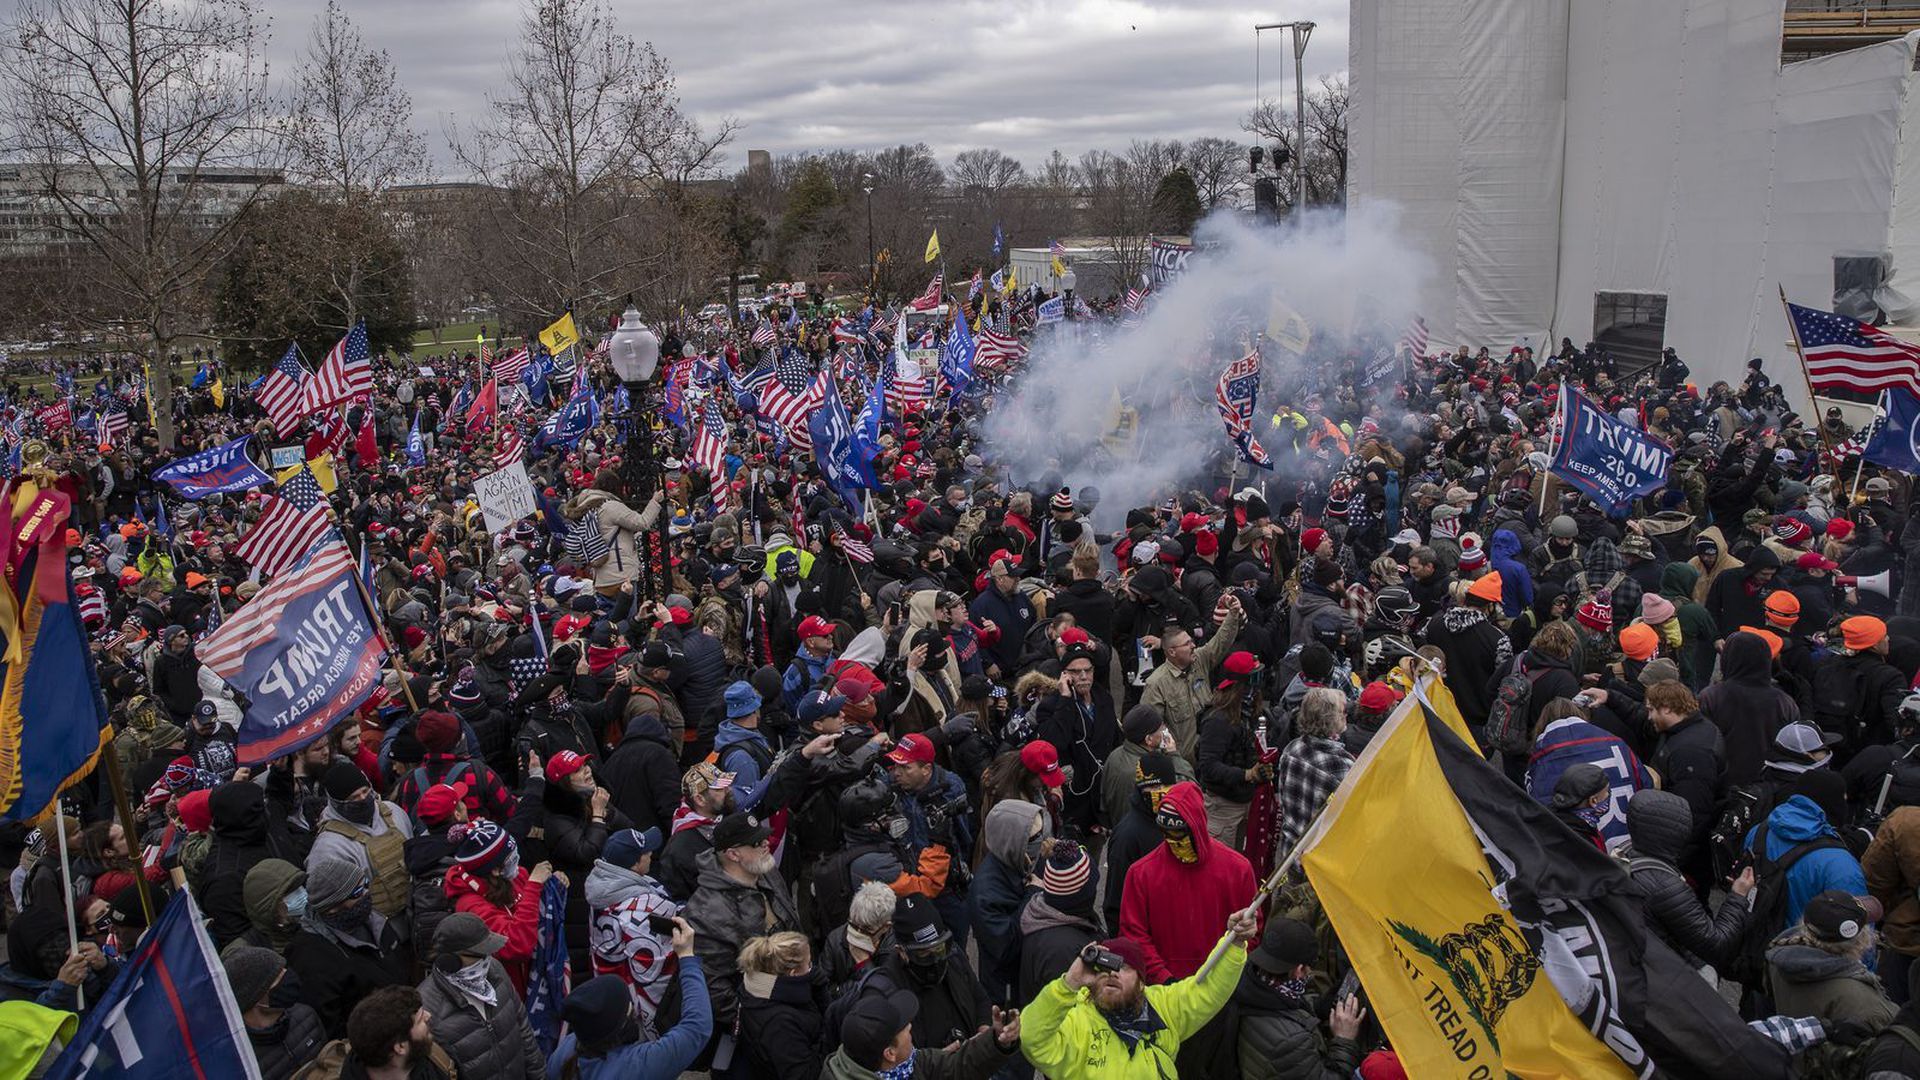 Thousands of people rioting at the U.S. capitol